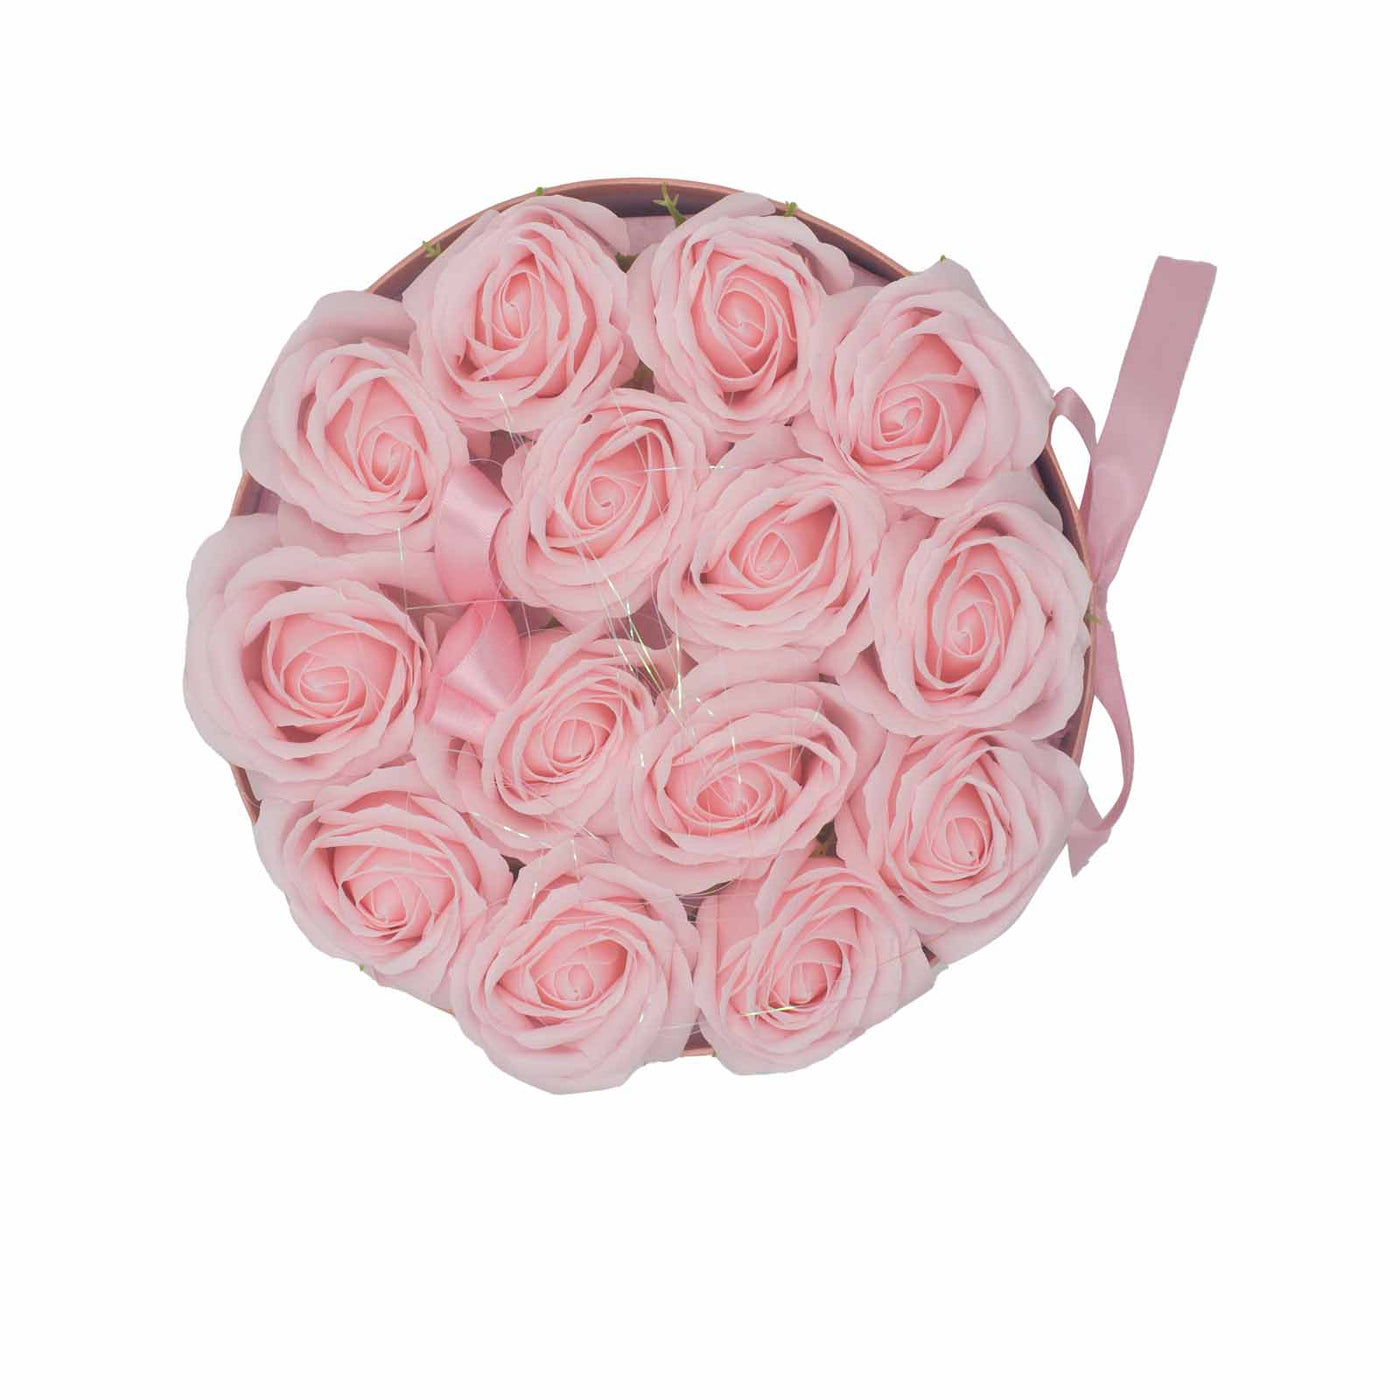 Body Soap Fragranced Flowers Gift Rose Bouquet - 14 Pink Roses In Round Gift Box.